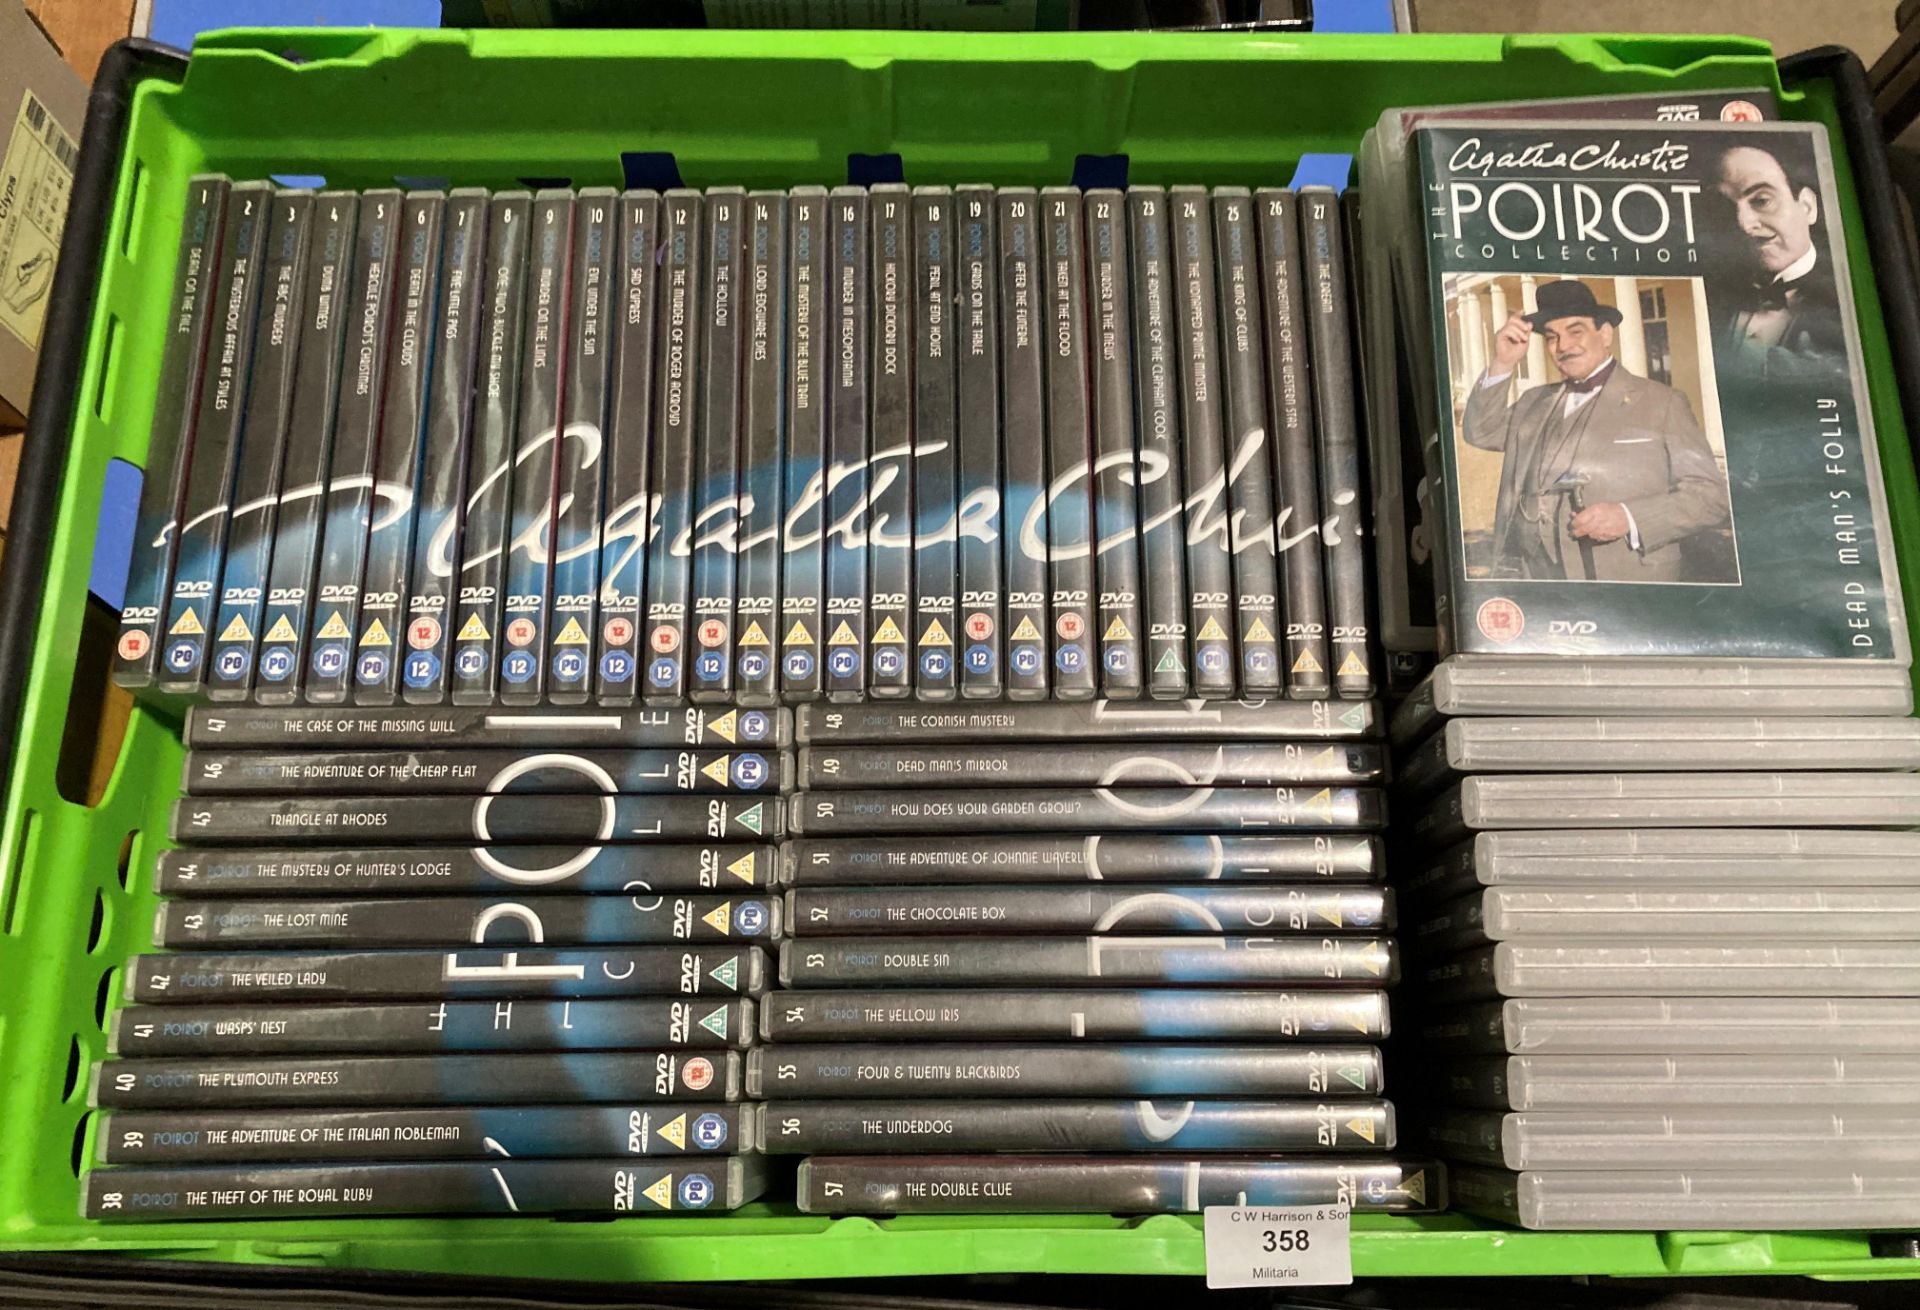 The complete run of 70 Agatha Christie Poirot DVDs featuring David Suchet complete with matching - Image 2 of 3